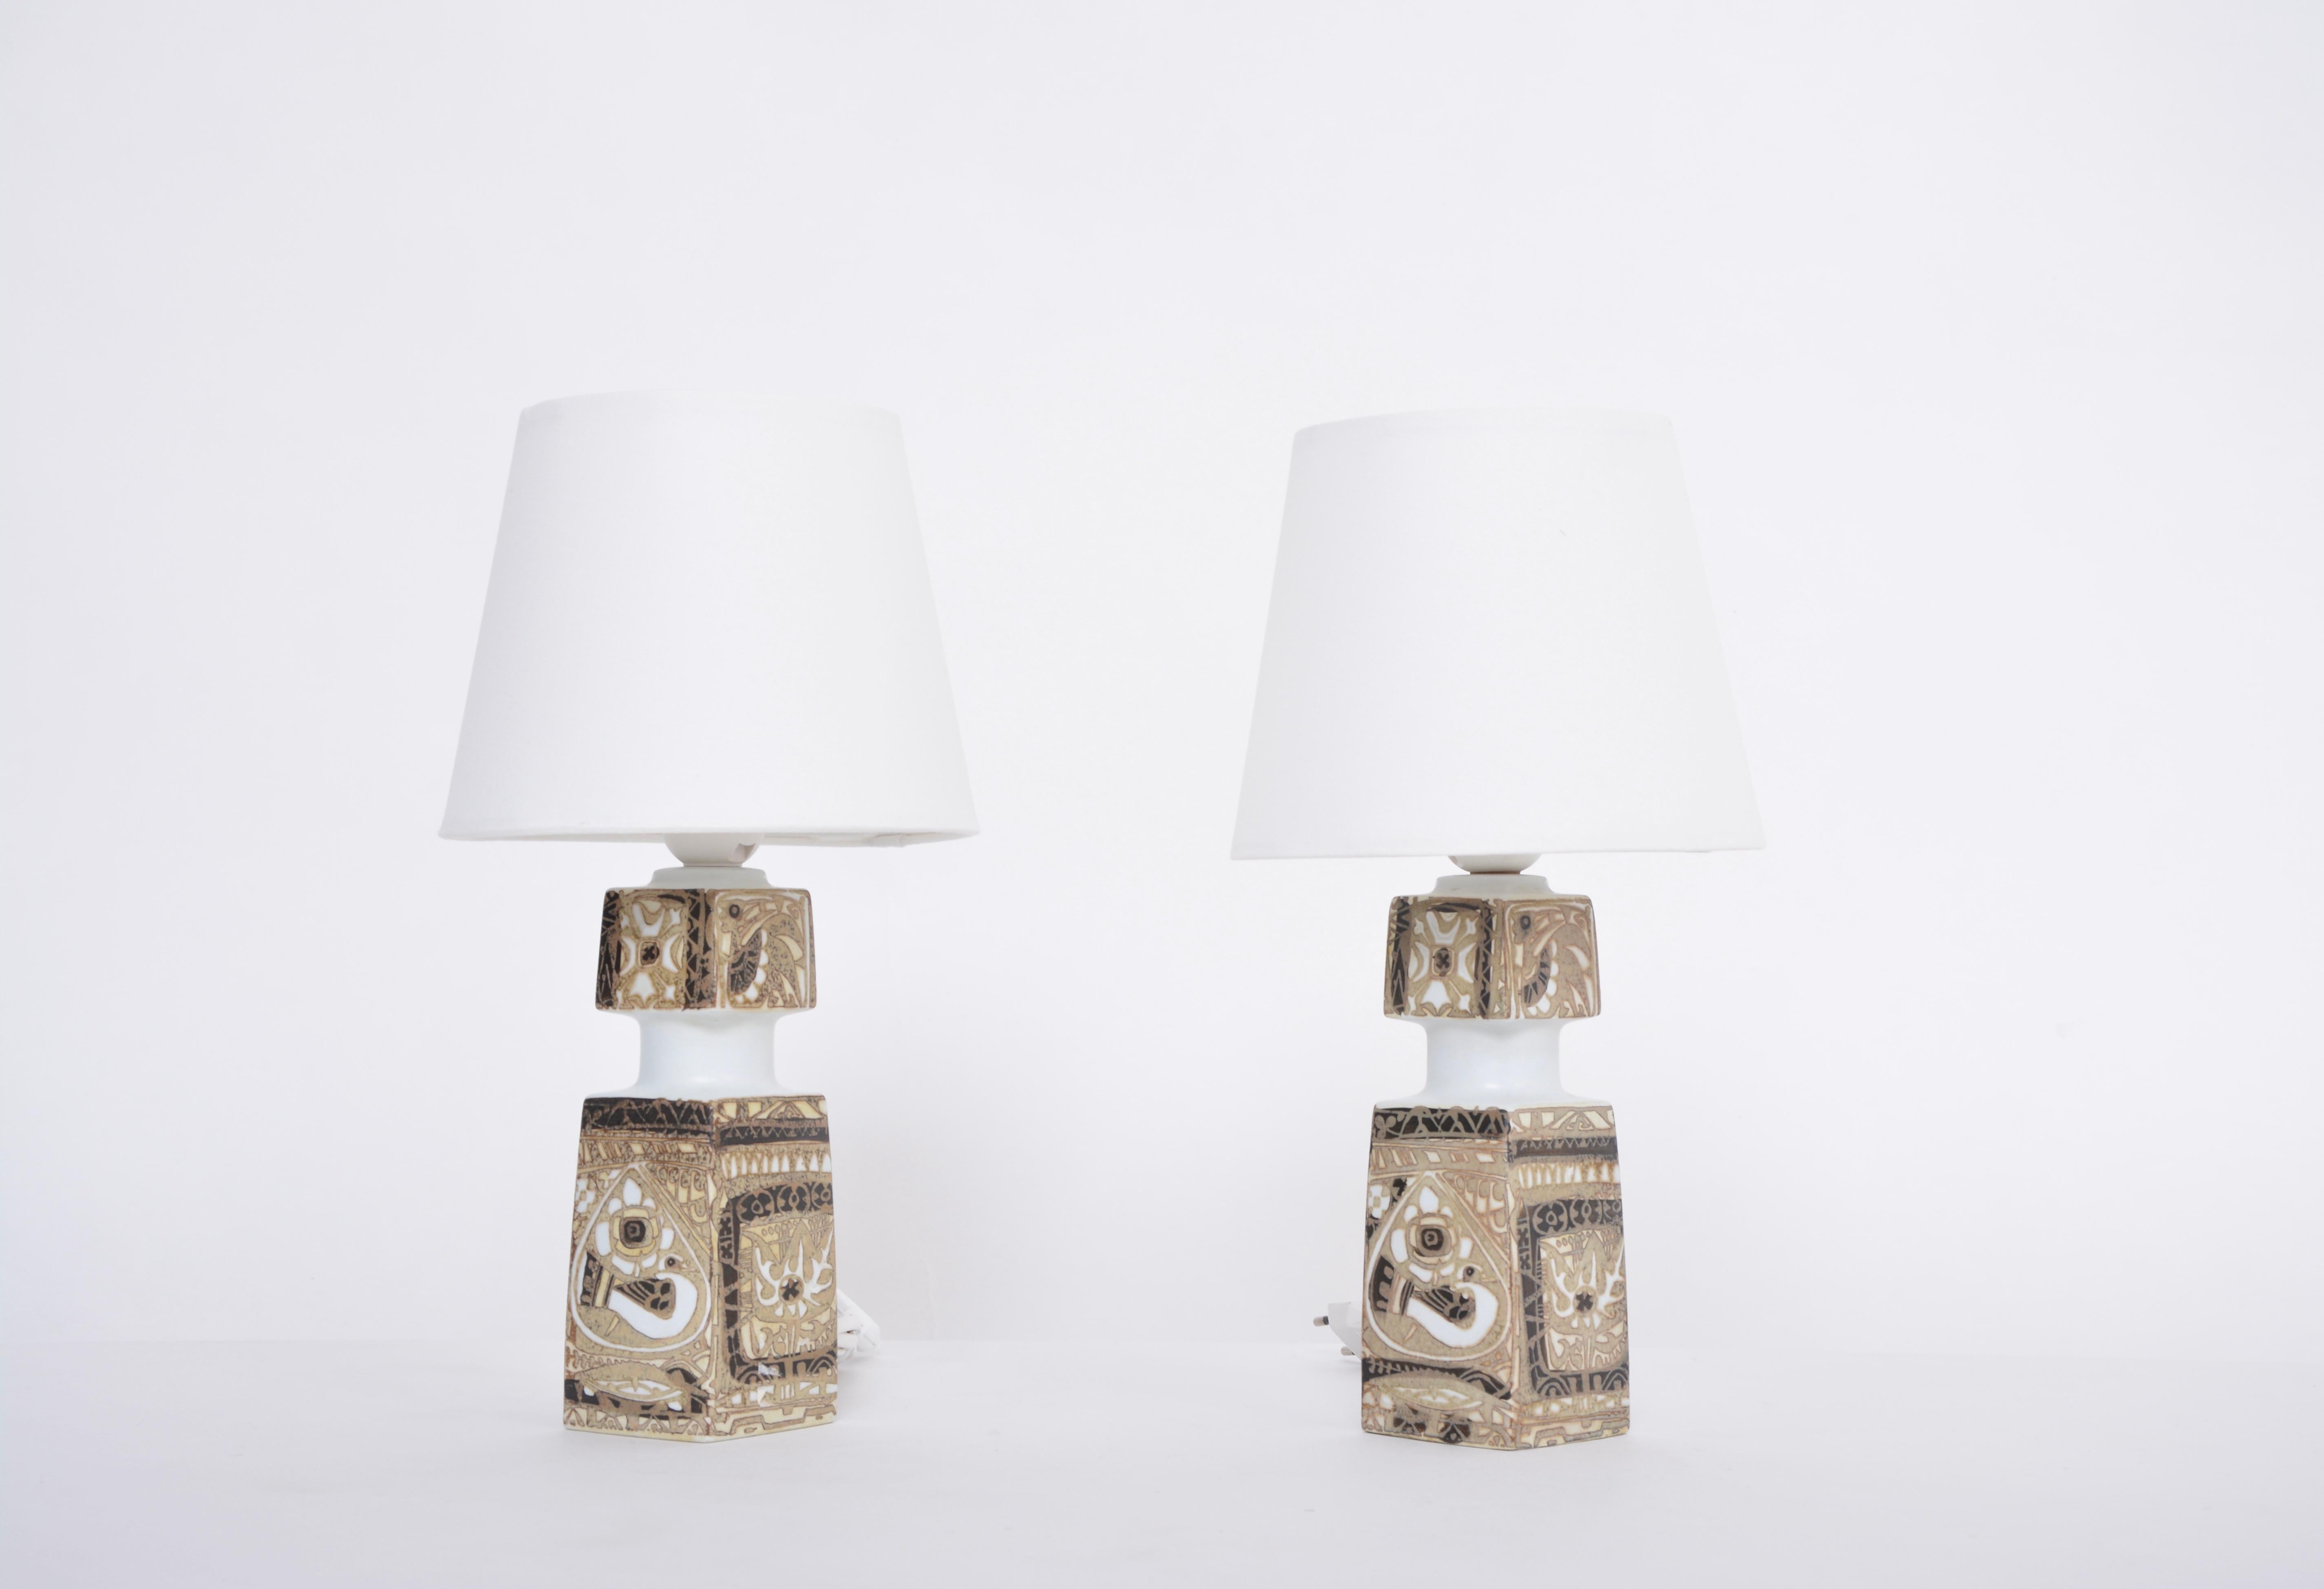 Pair of Danish Mid-Century Modern table lamps by Nils Thorsson for Fog & Morup

These table lamps were designed by Royal Copenhagen's head designer for the BACA series, Nils Thorsson in the 1960s. The lamps were produced by Danish company Fog &